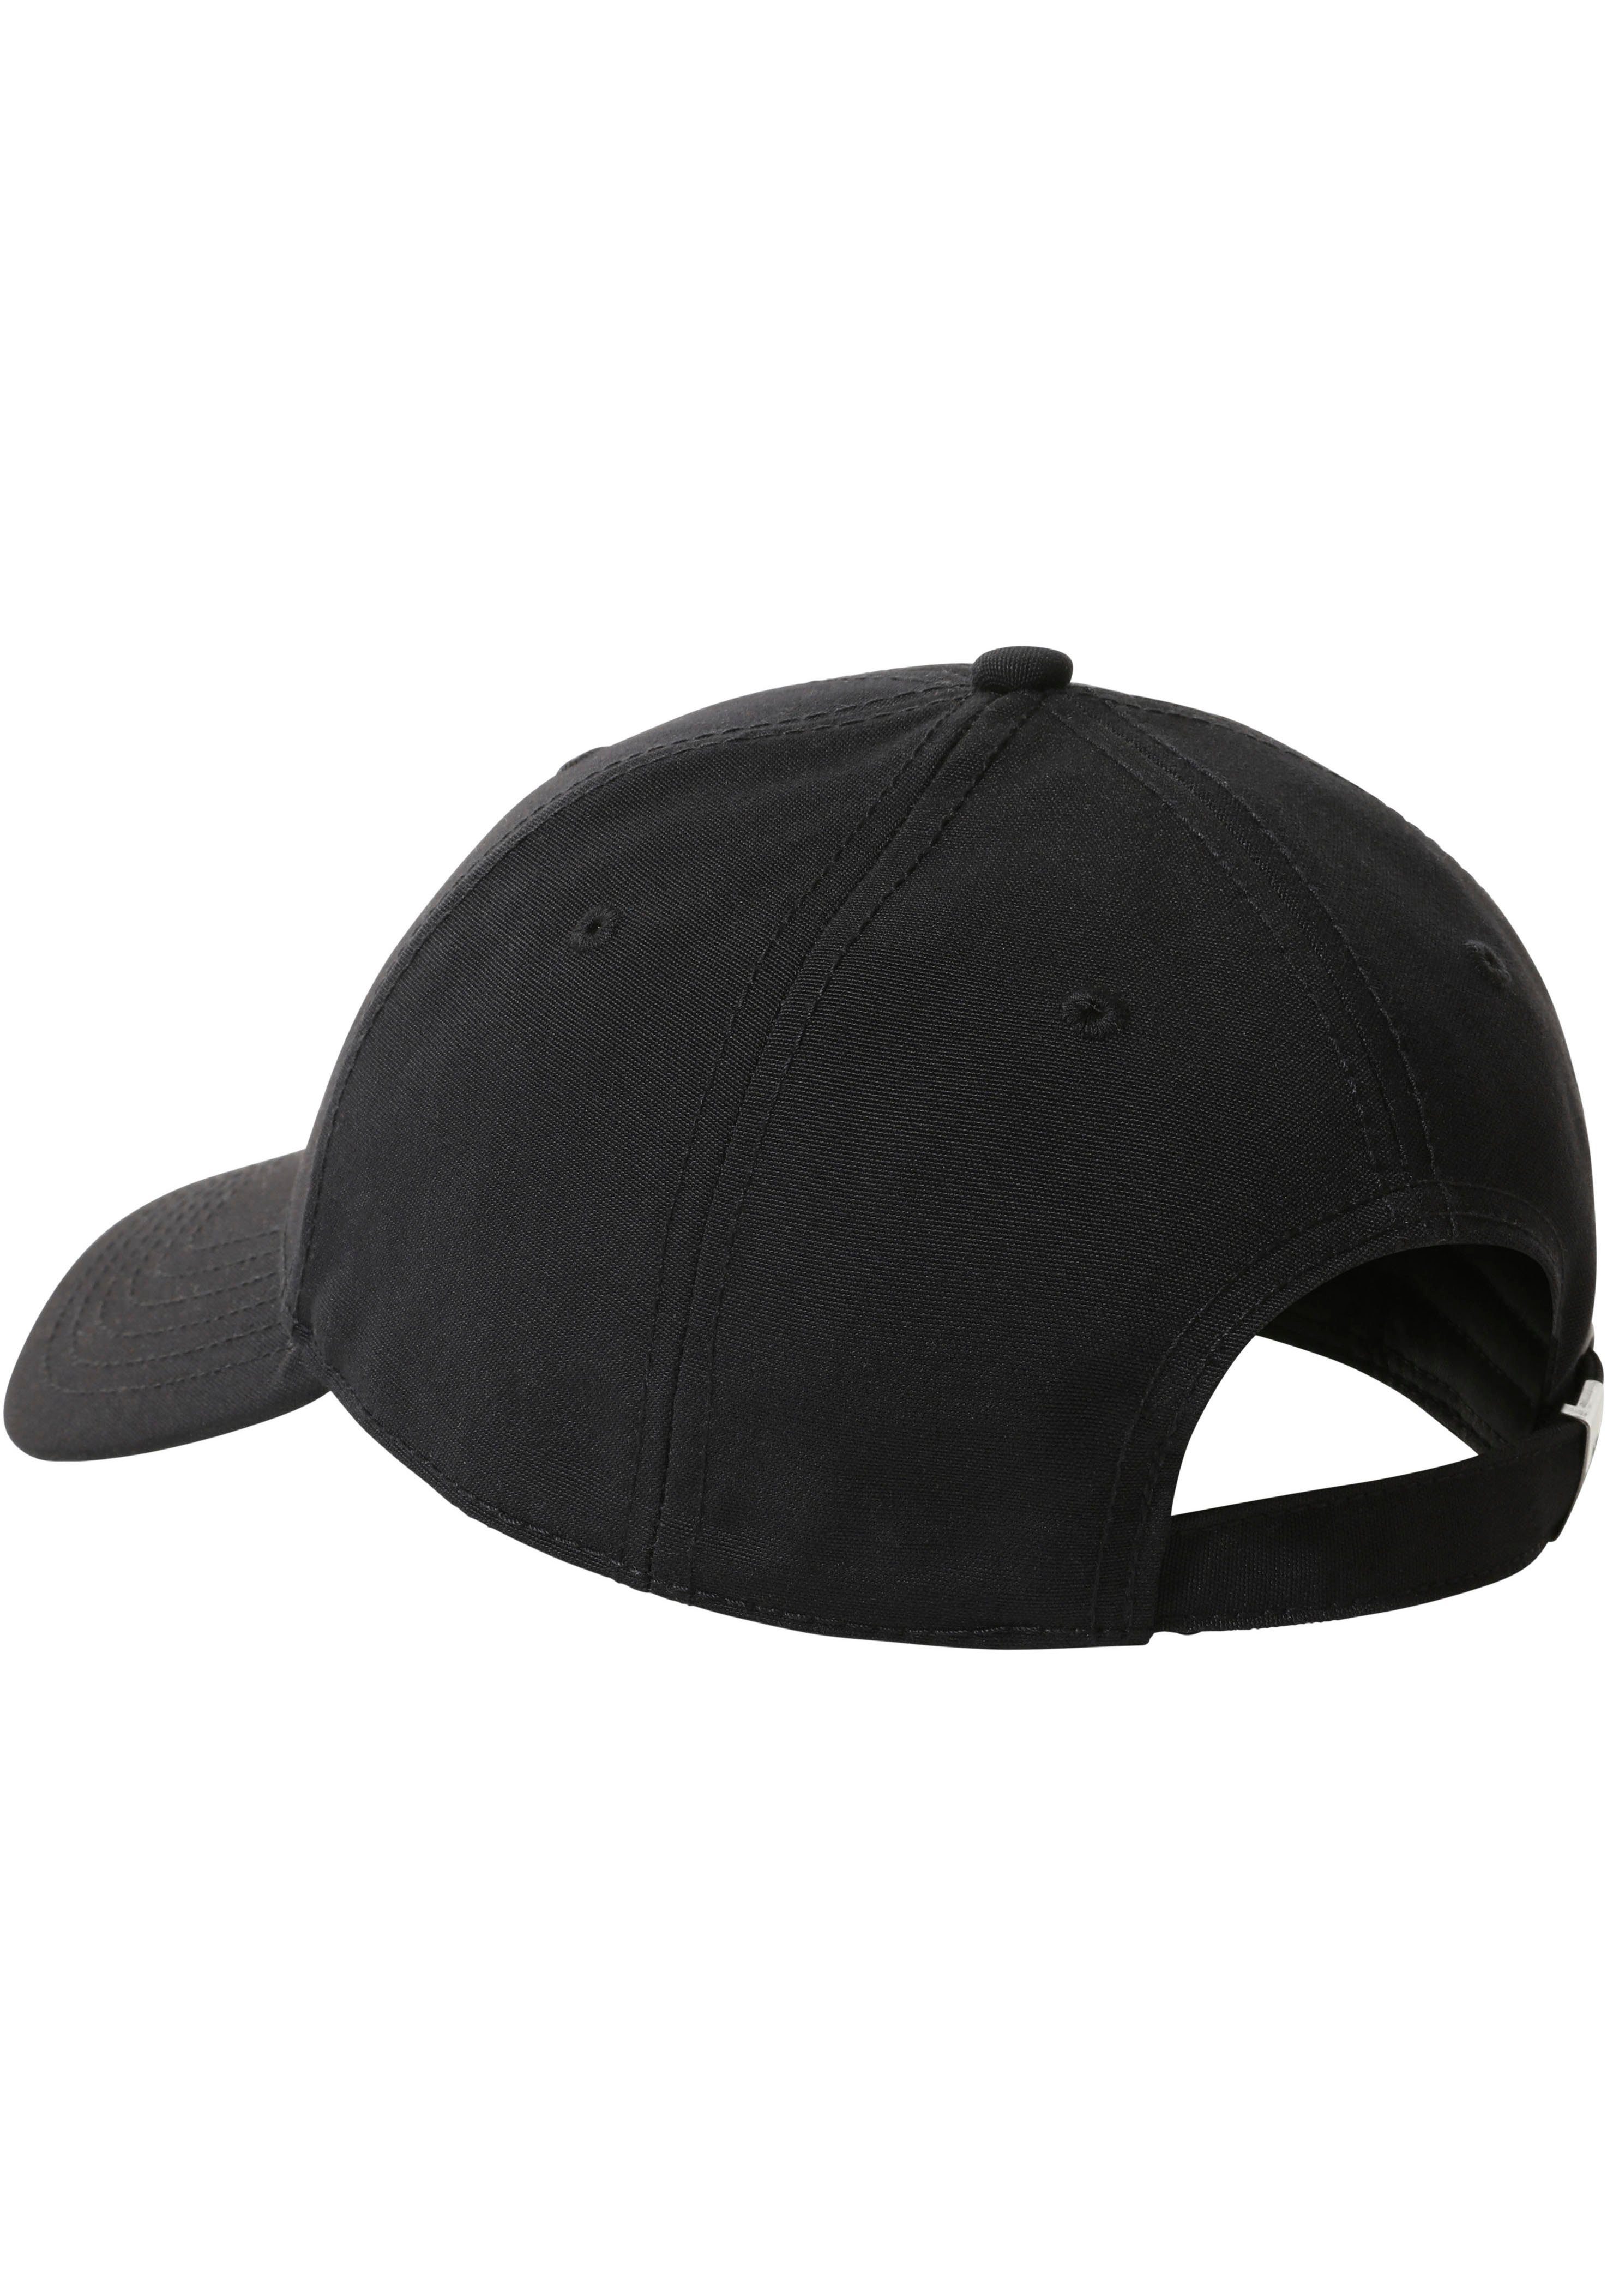 HAT Face 66 The CLASSIC Cap North schwarz RECYCLED Baseball